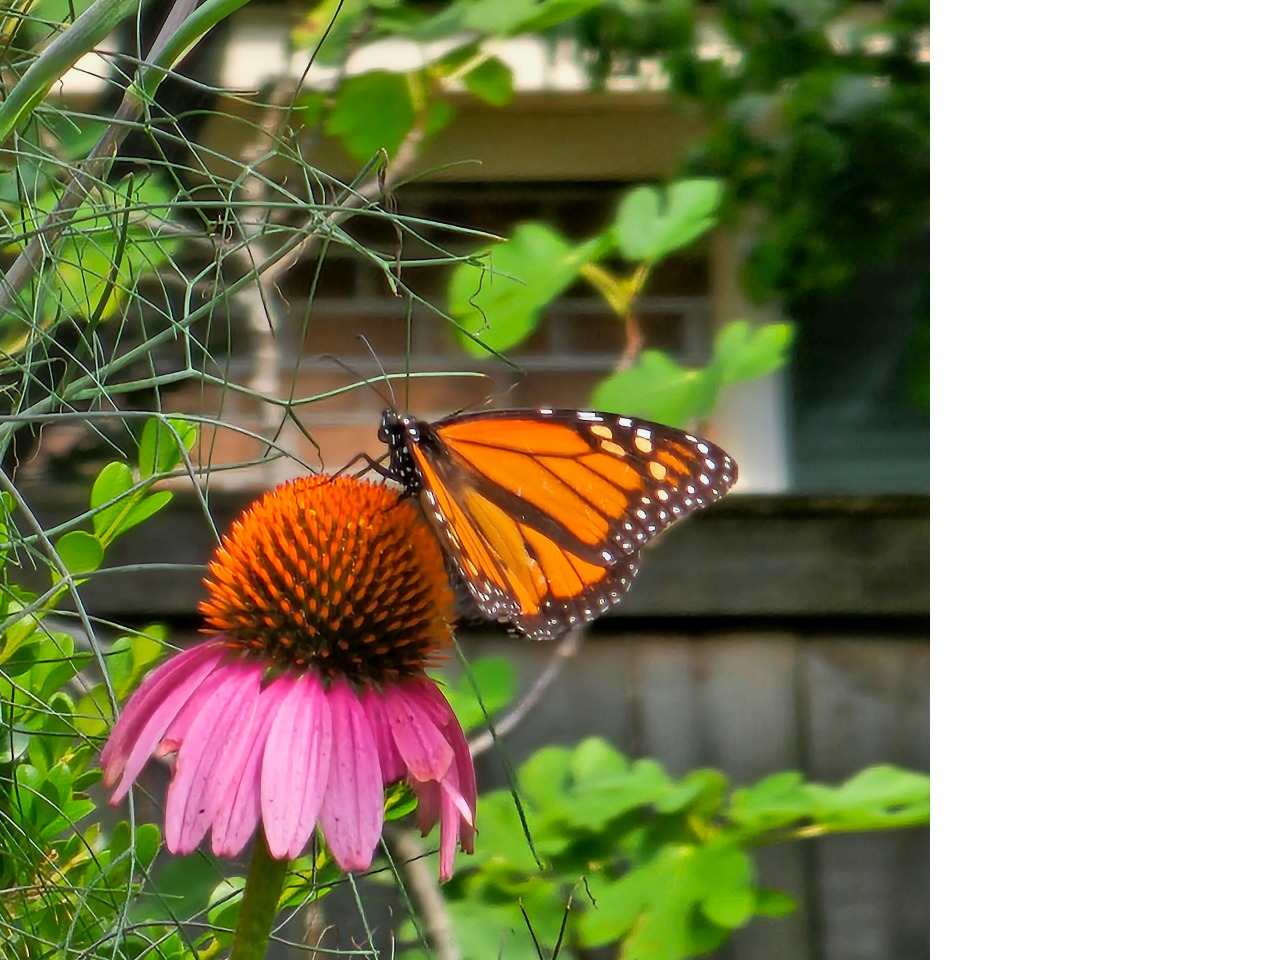 A monarch butterfly on a coneflower